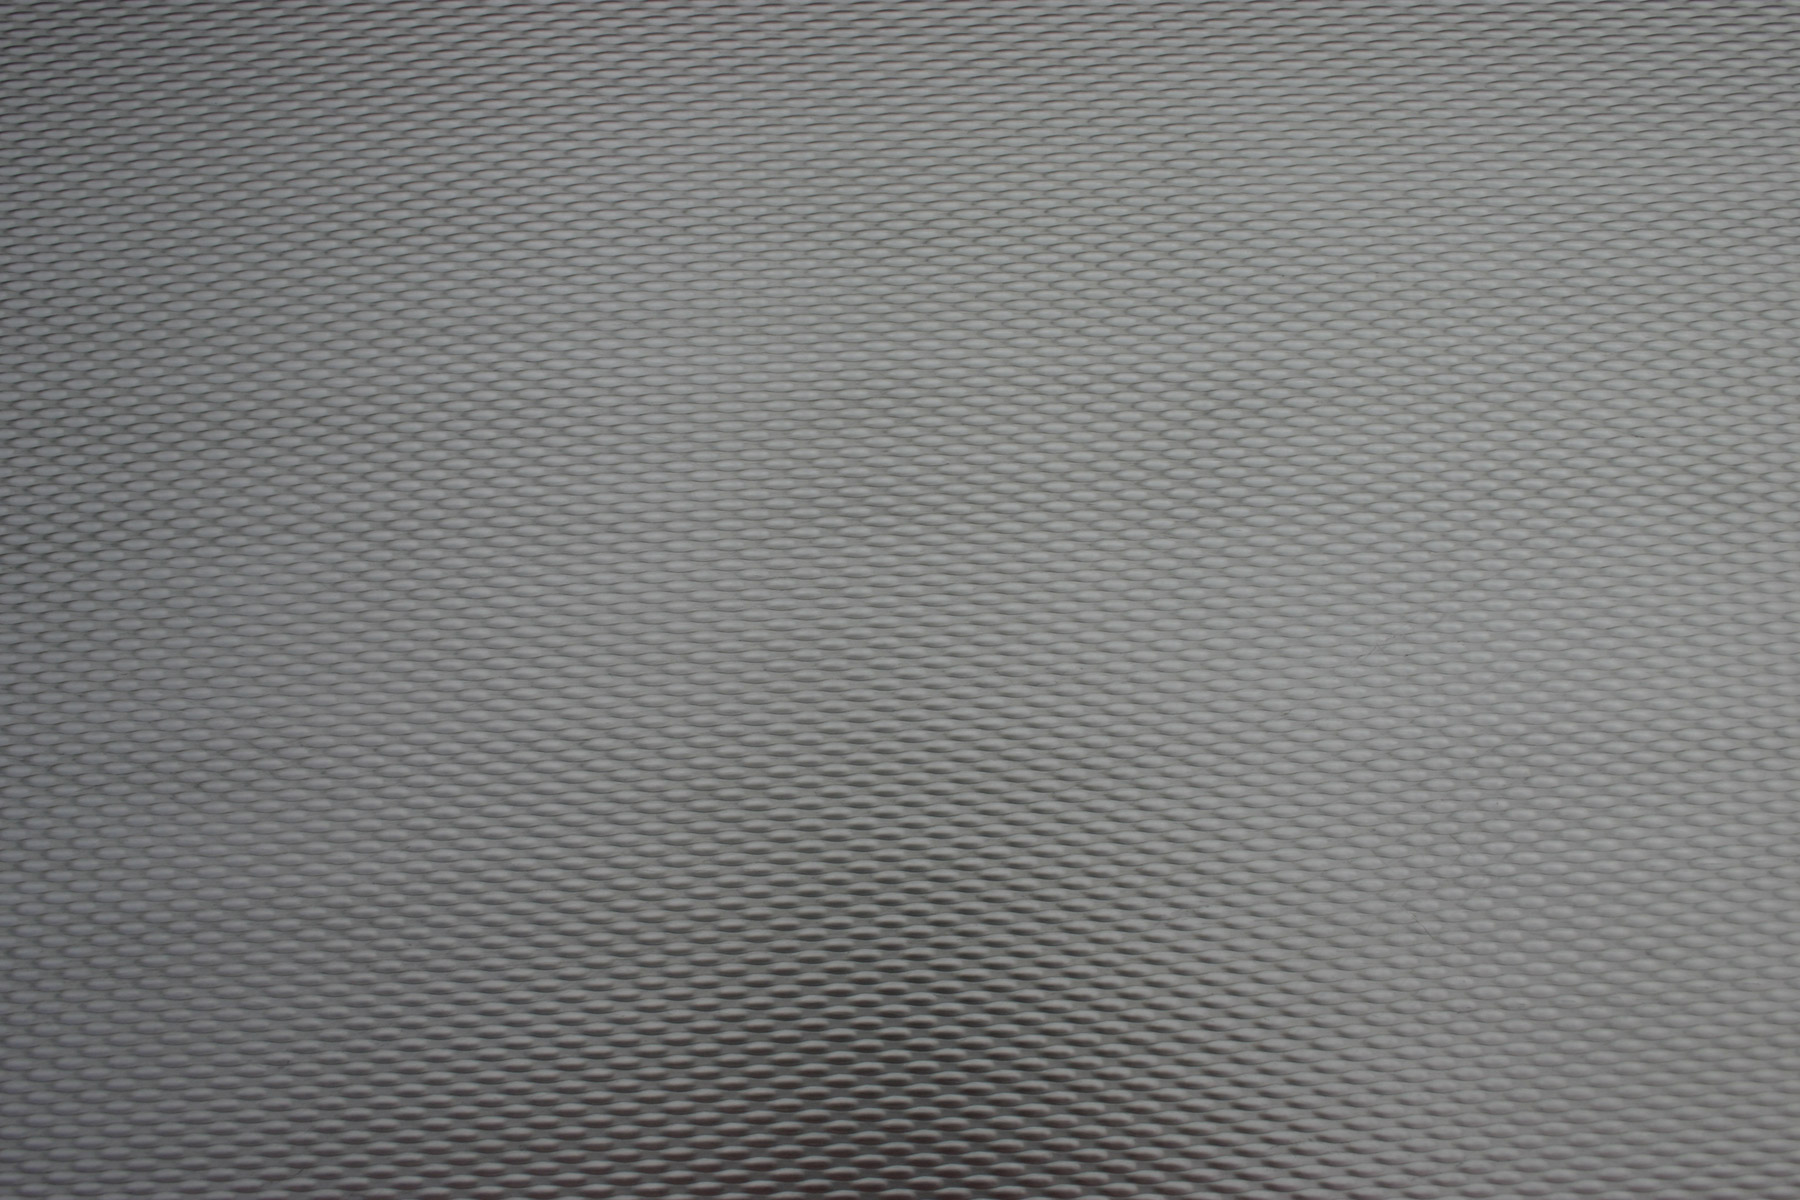 Brushed steel texture photo